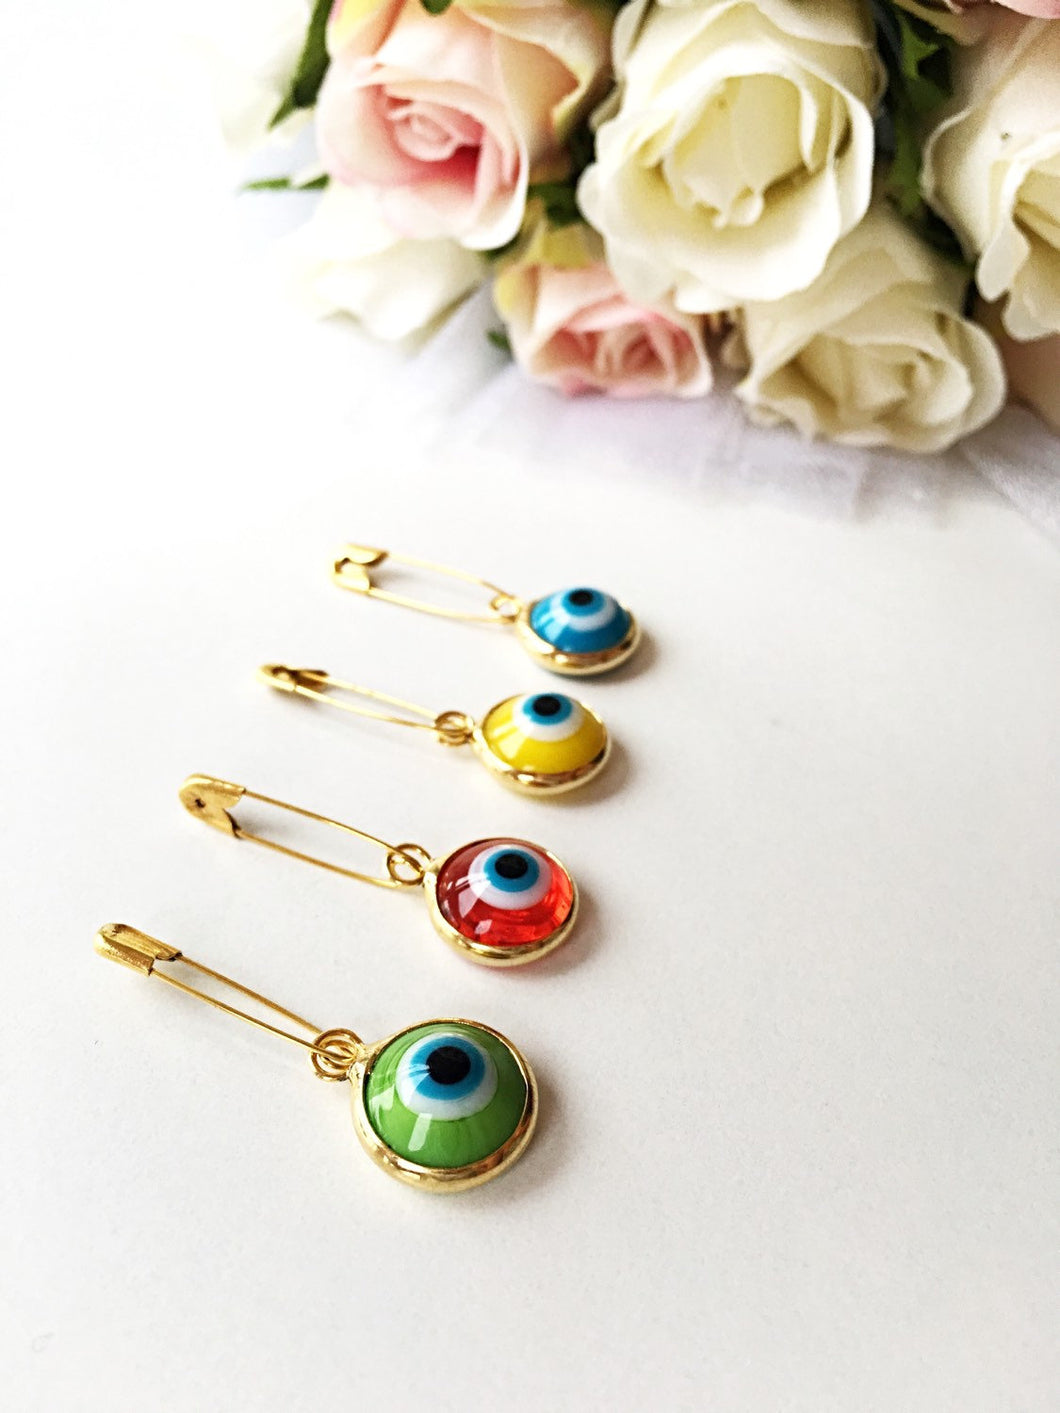 Lucky evil eye safety pin, protection for baby, gold plated evil eye pins, baby boy gift pin, baby shower gift, stroller, birth announcement - Evileyefavor